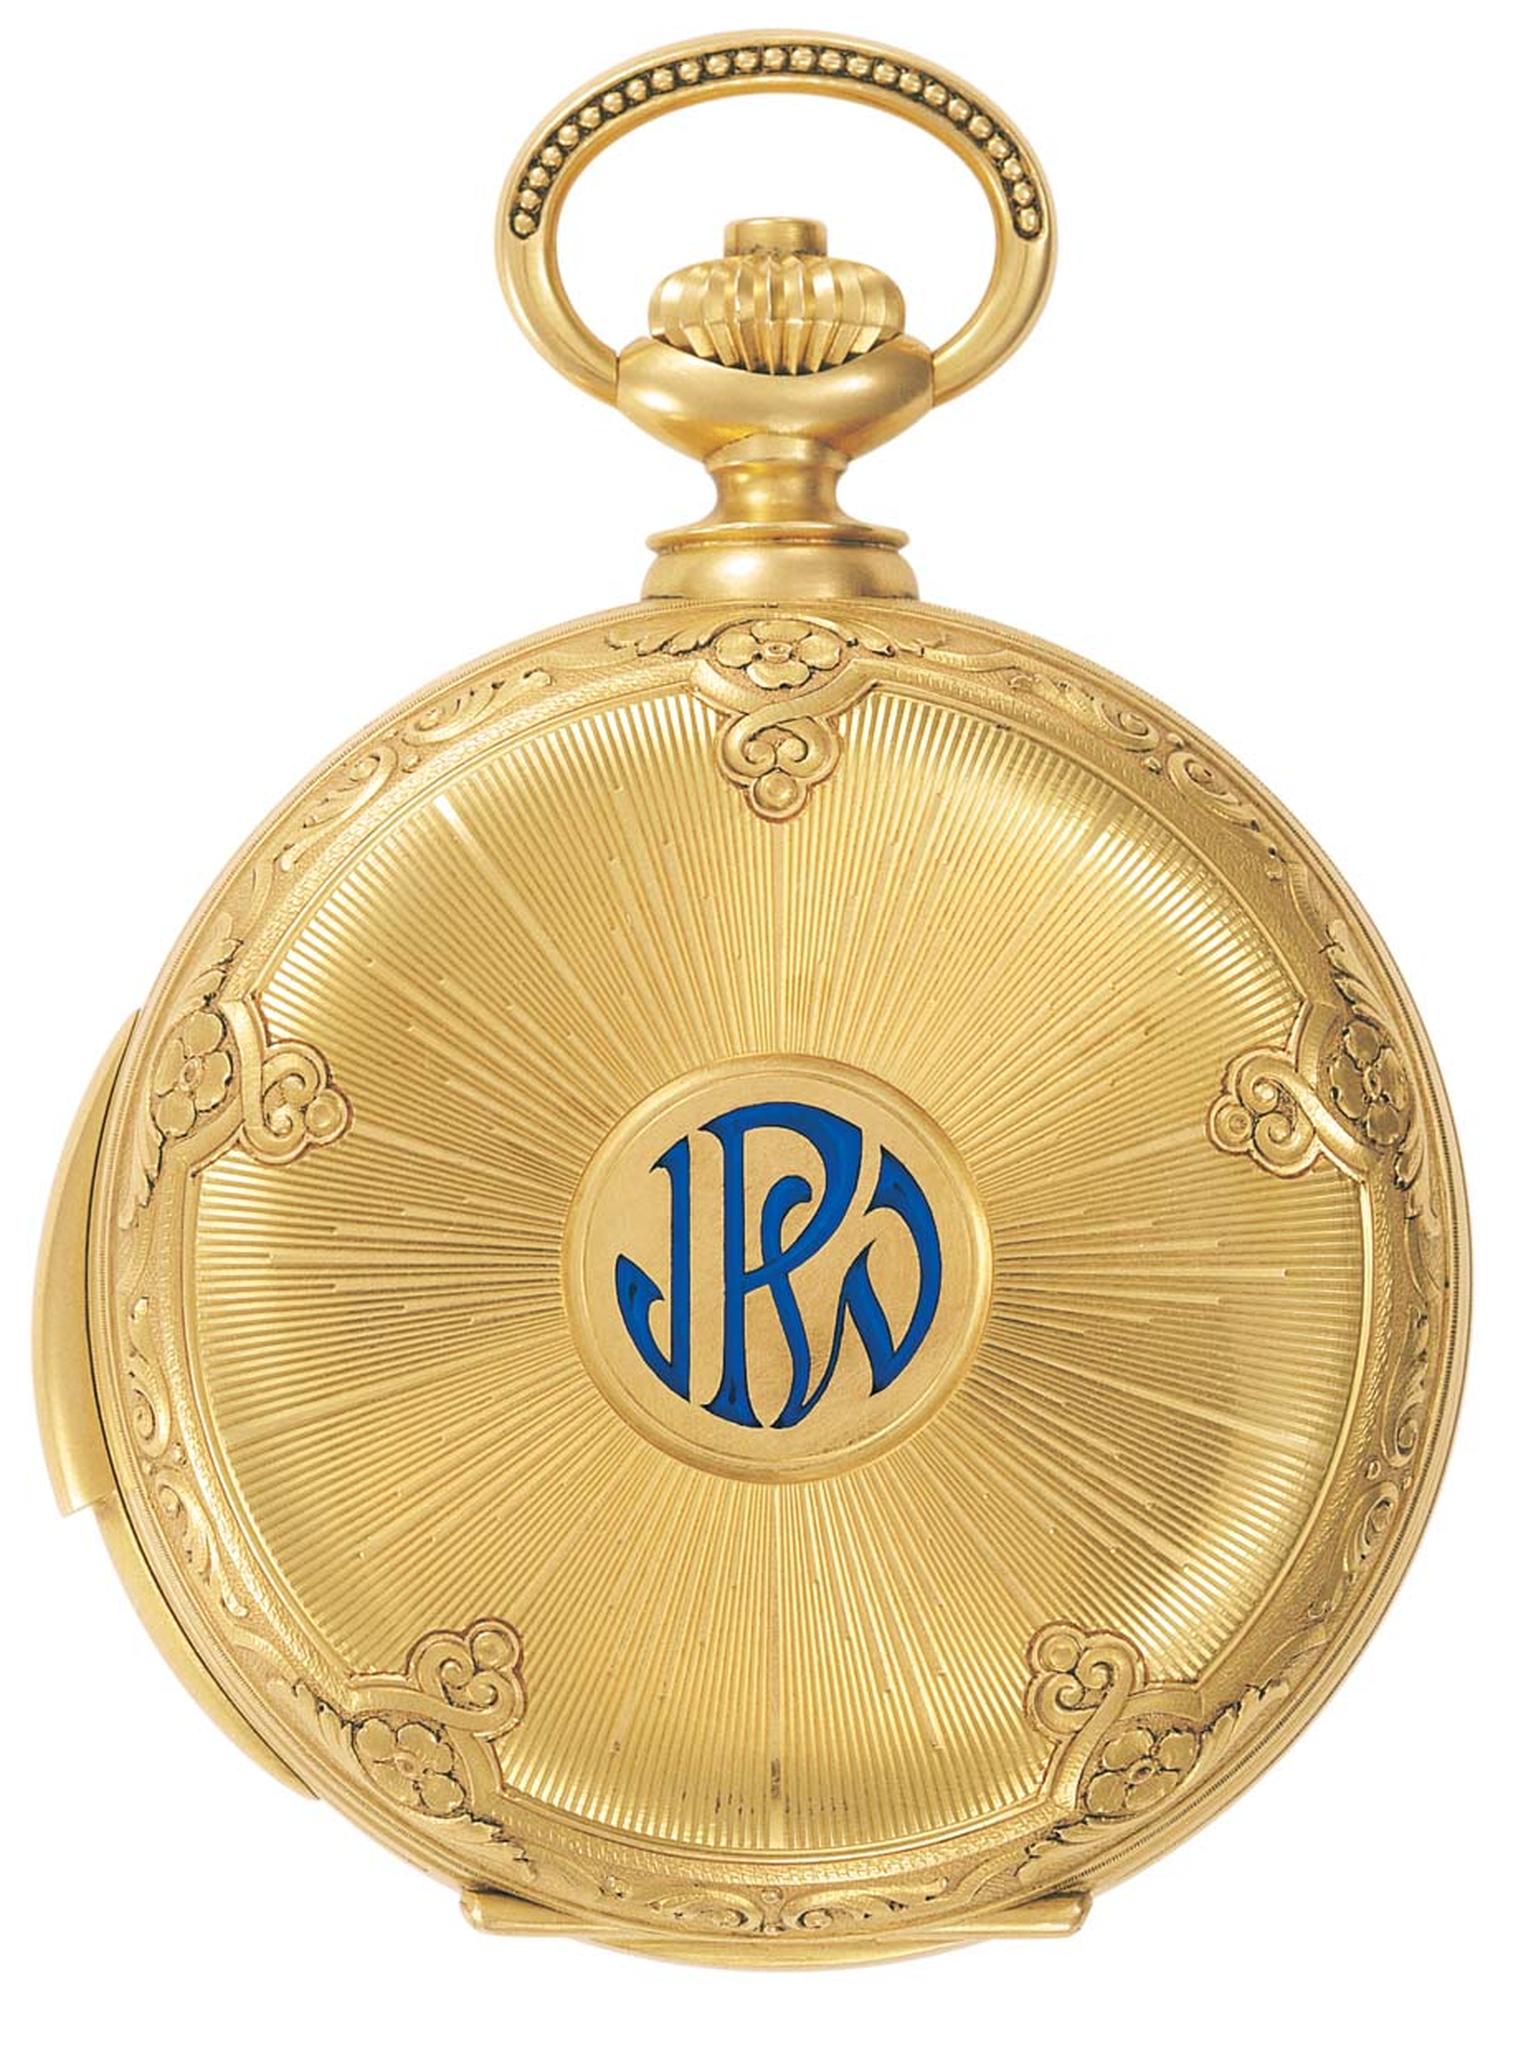 The reverse of James Ward Packard's astronomical pocket watch.